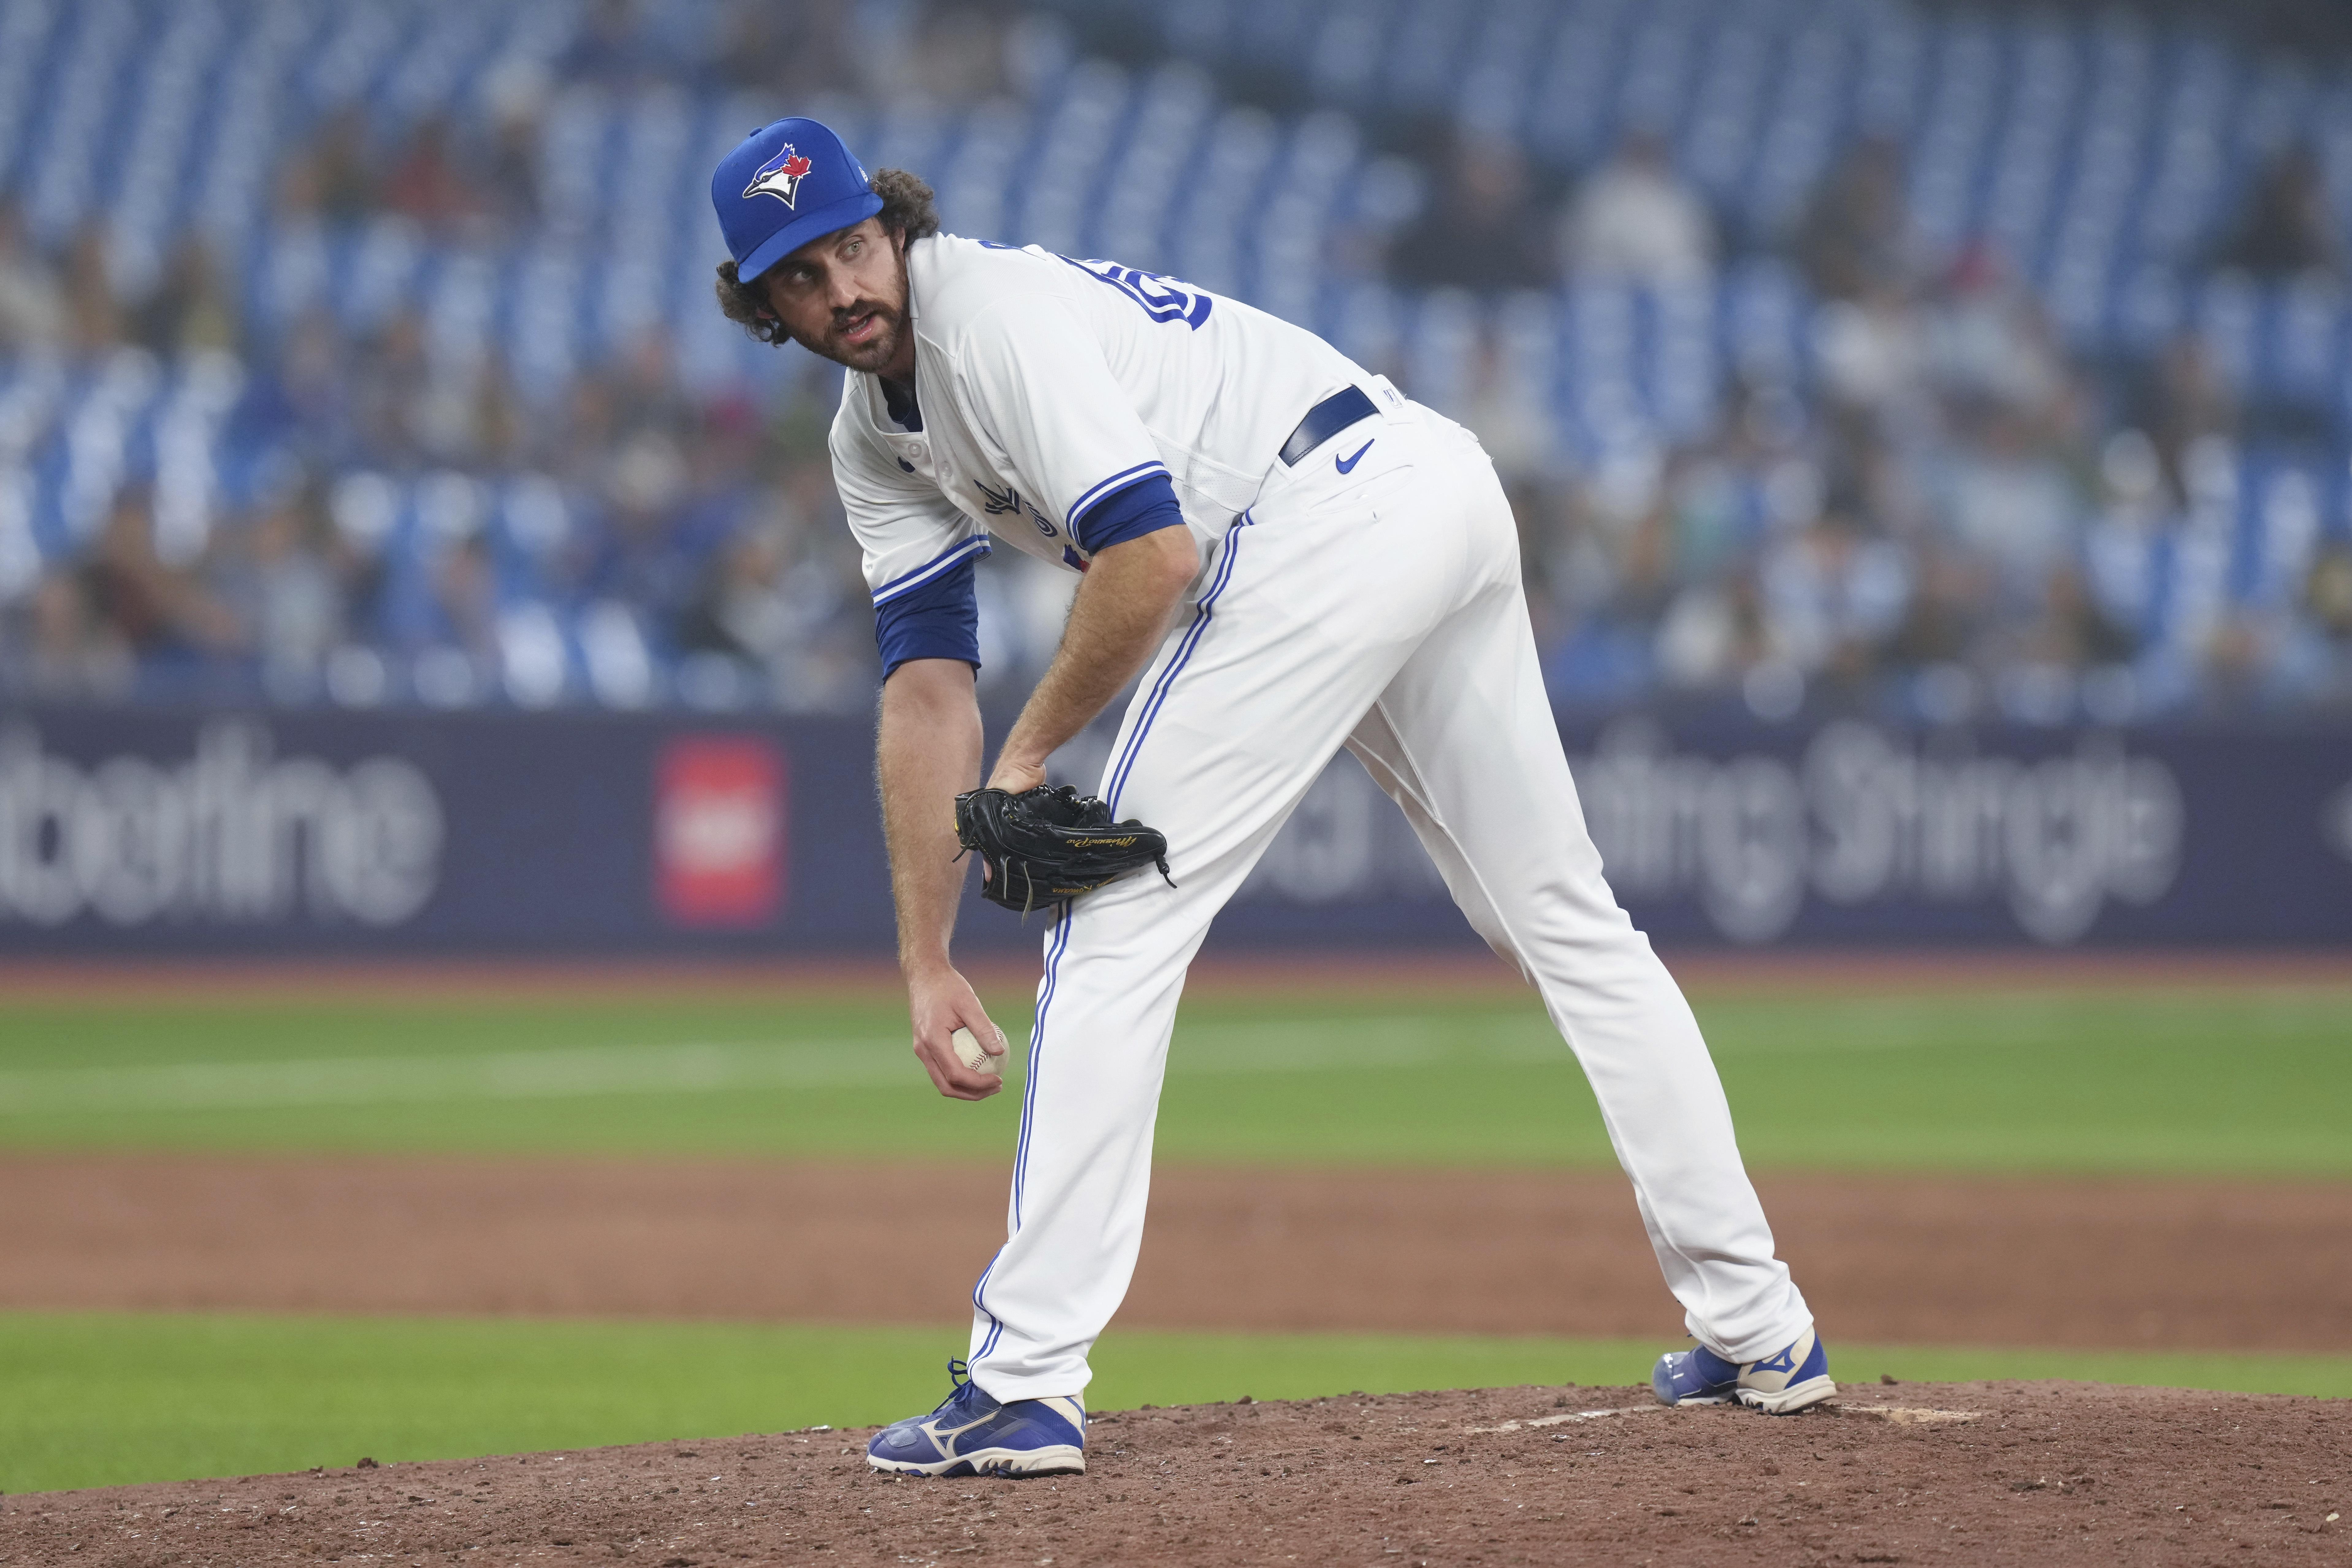 Should Jordan Romano be closing games for the Blue Jays with injury issues?